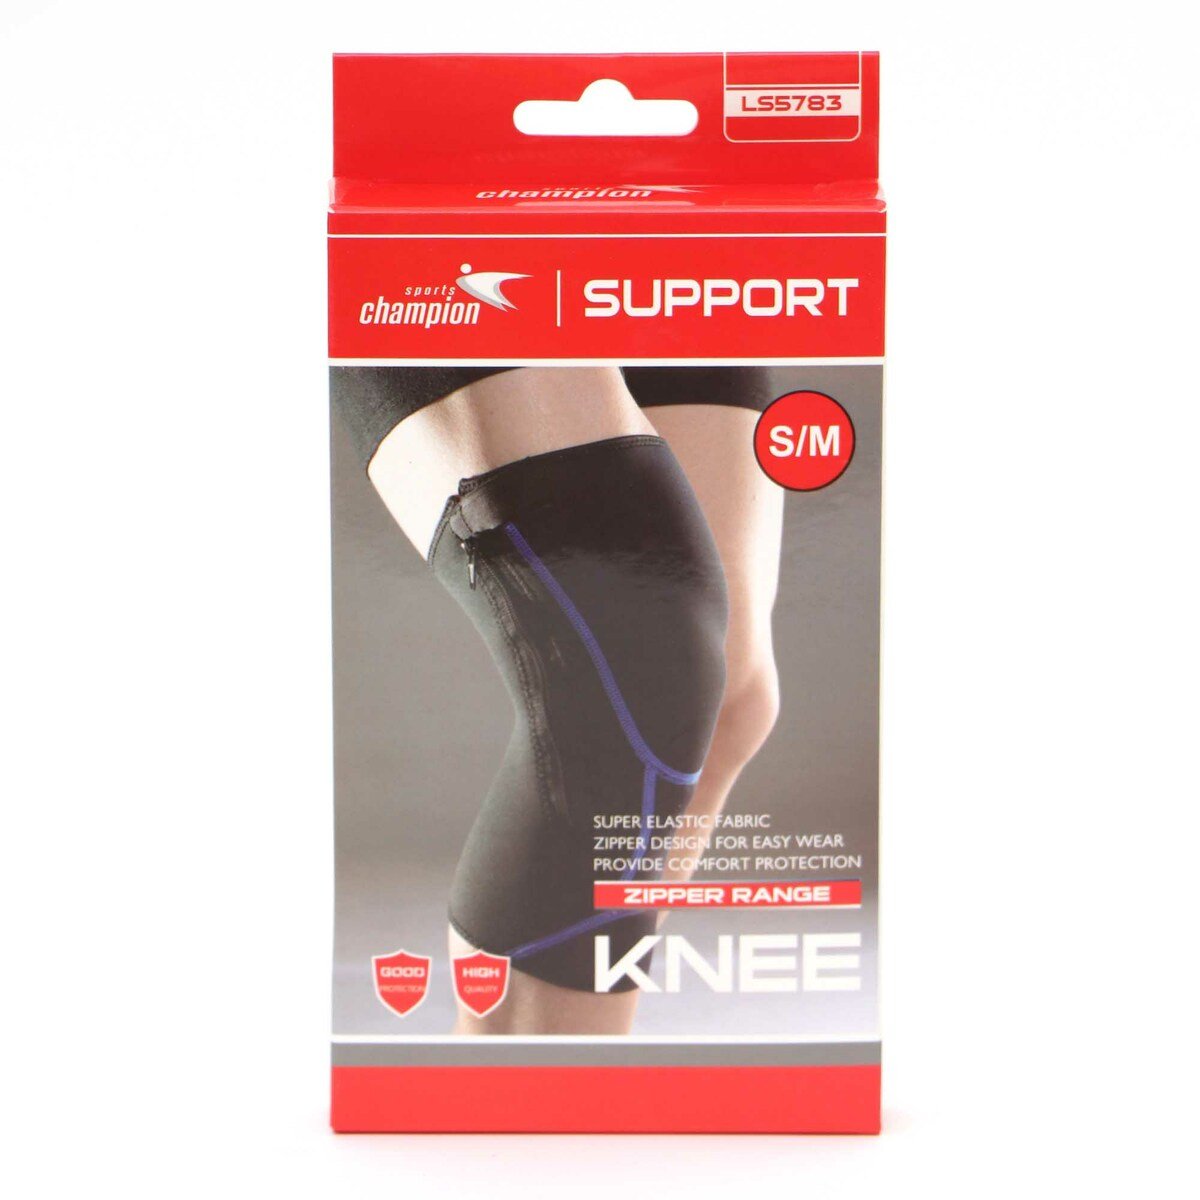 Sports Champion Knee Support LS5783 Small